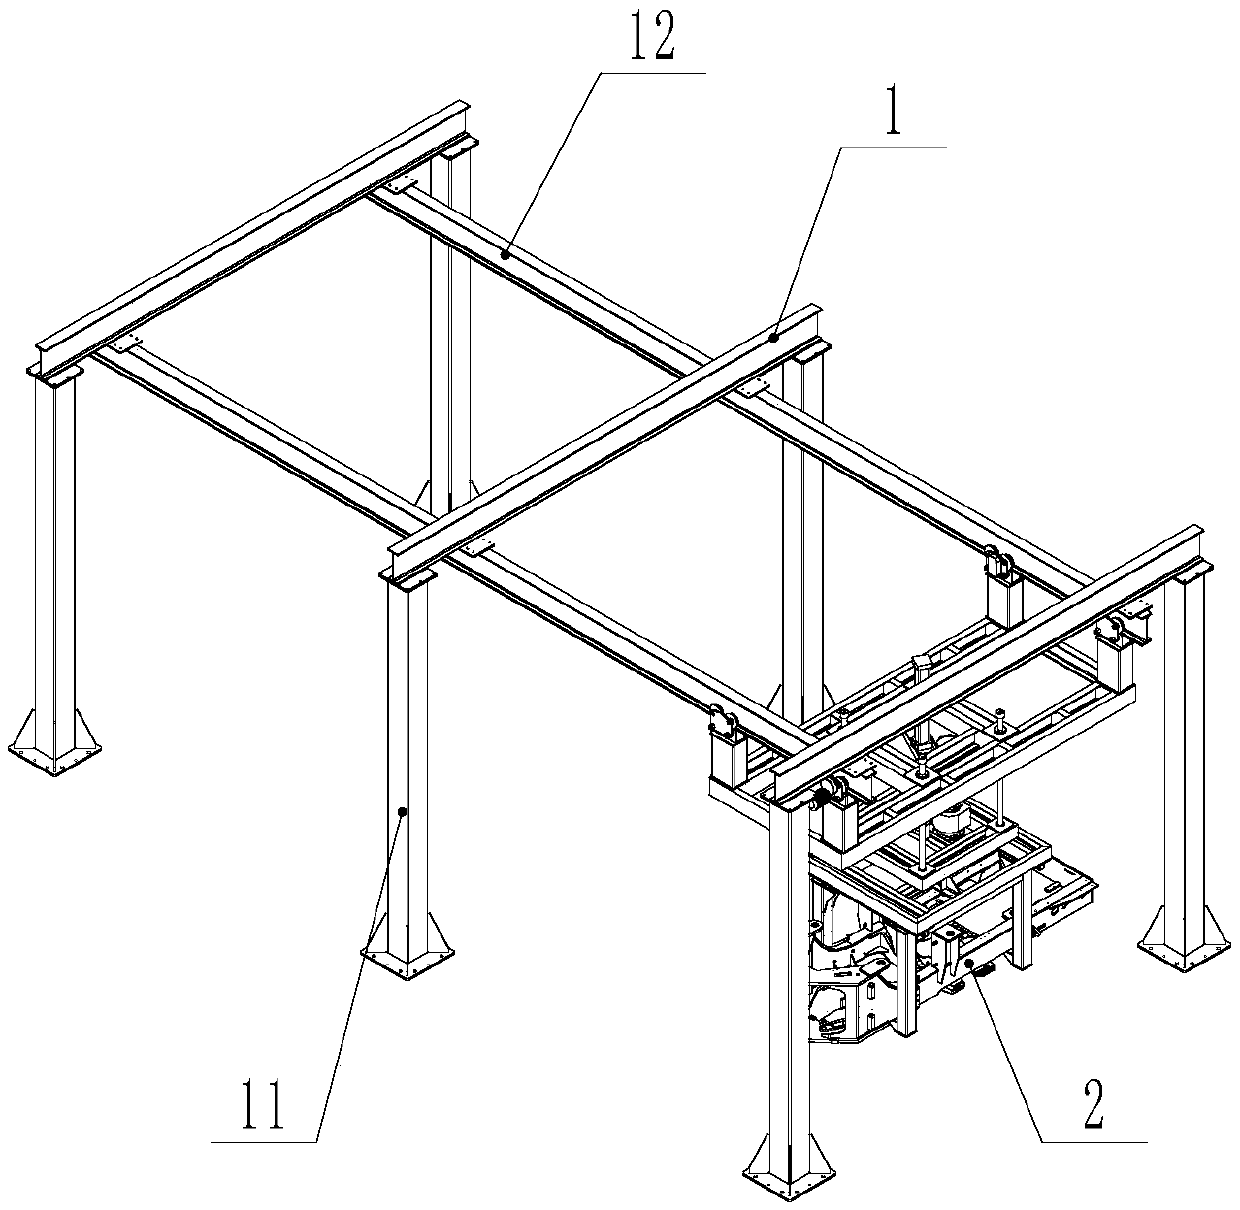 Device for automatically loading loader rear frame onto assembly line